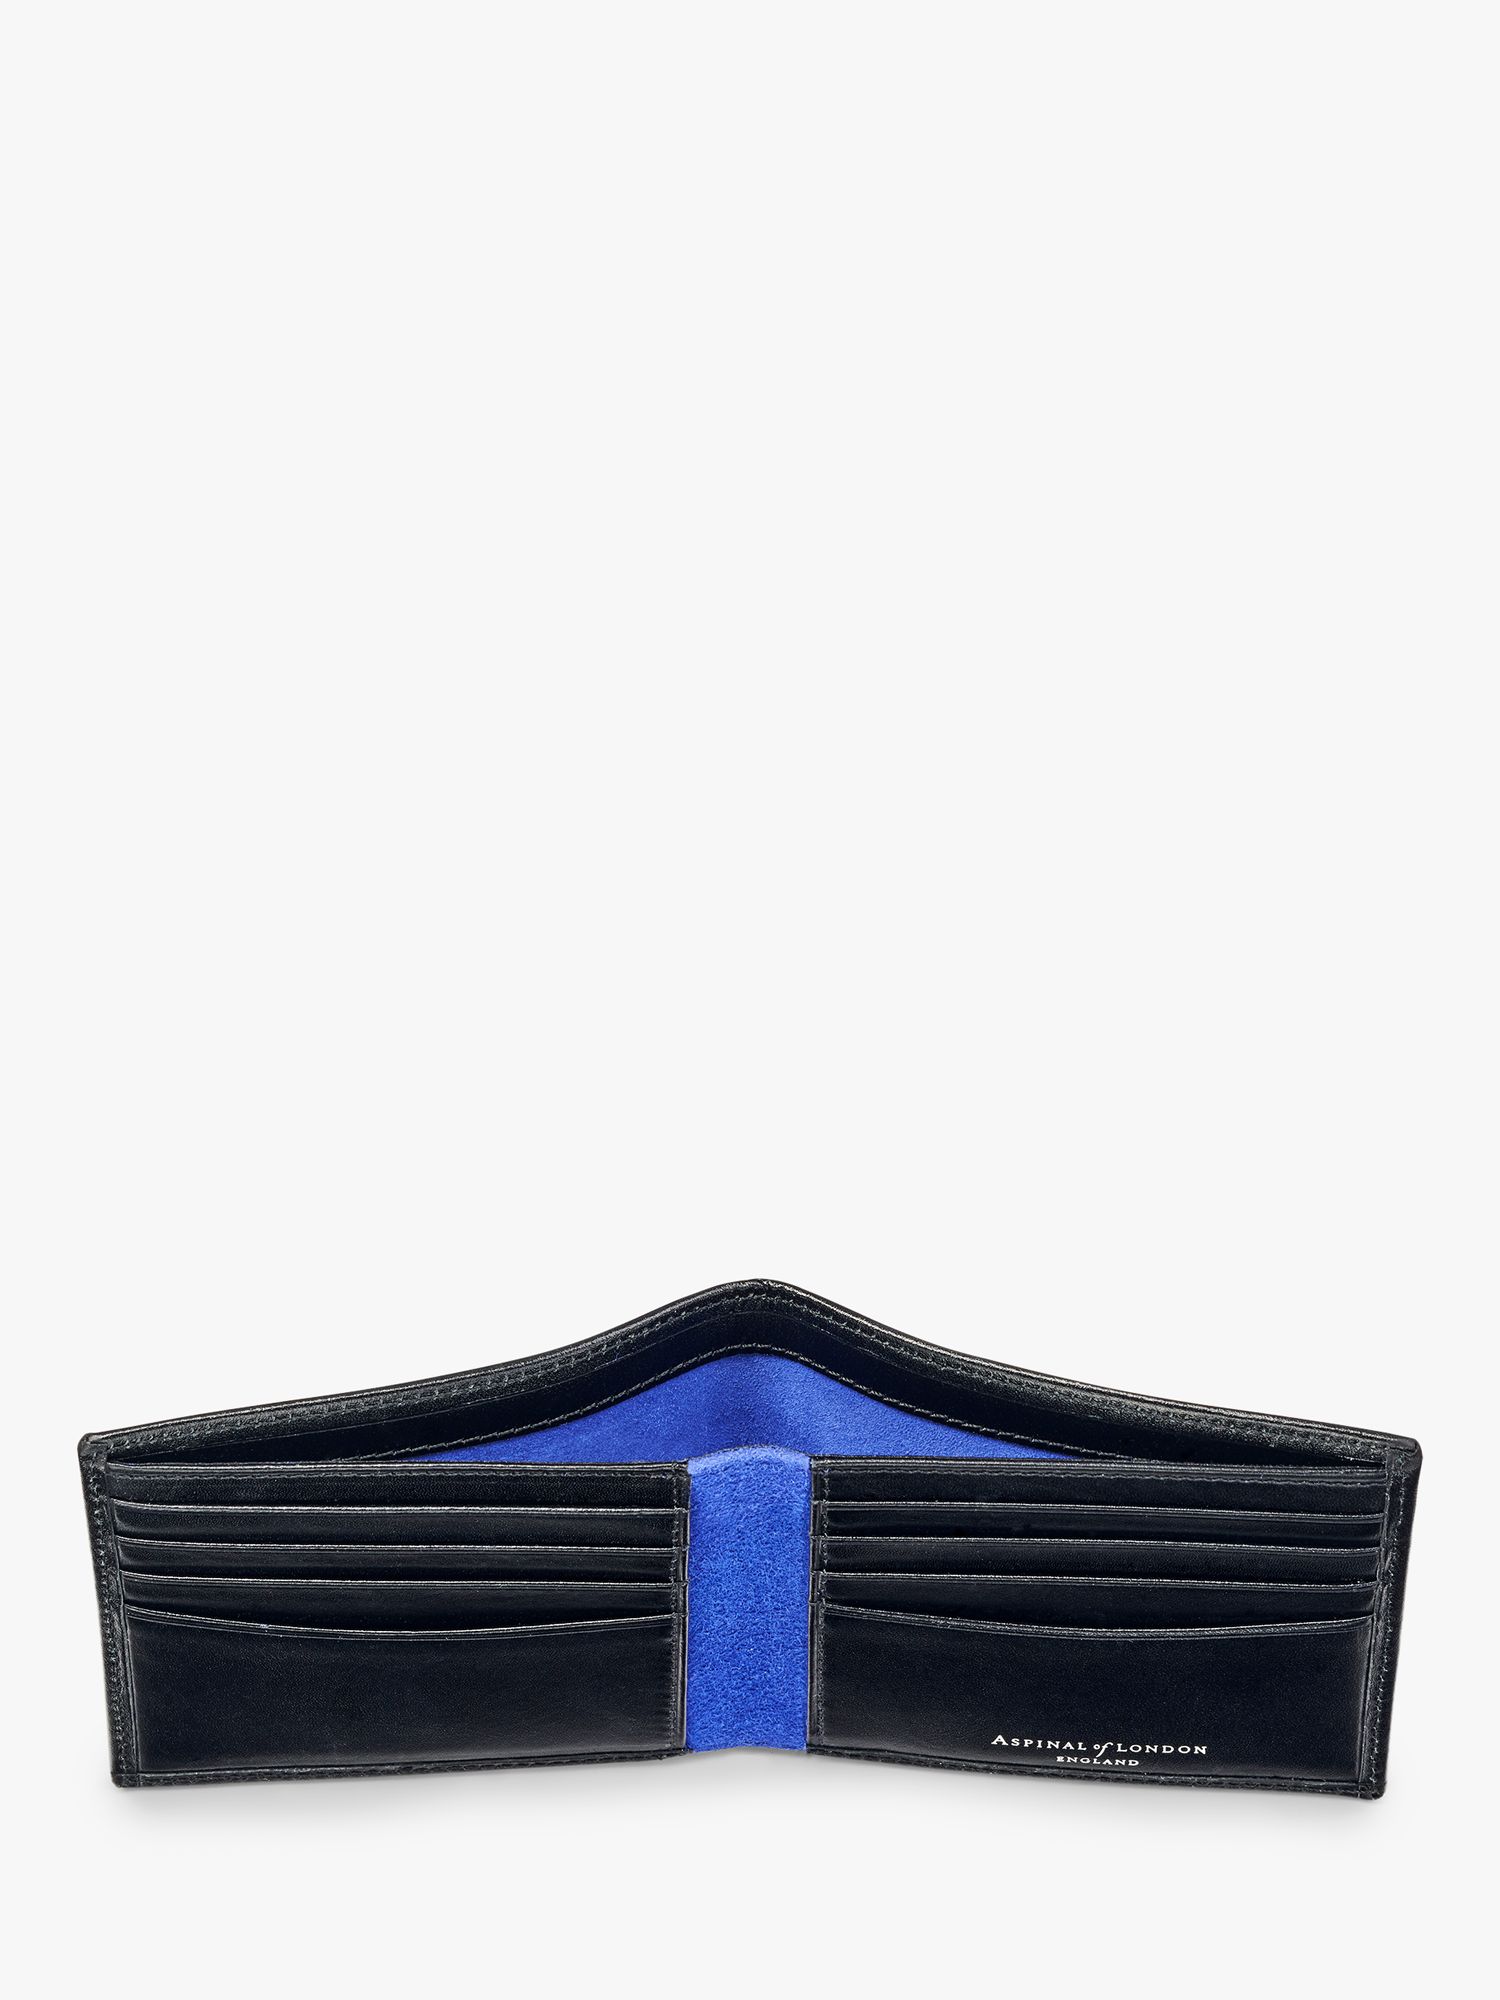 Aspinal of London Classic Smooth Leather Billfold Wallet, Black